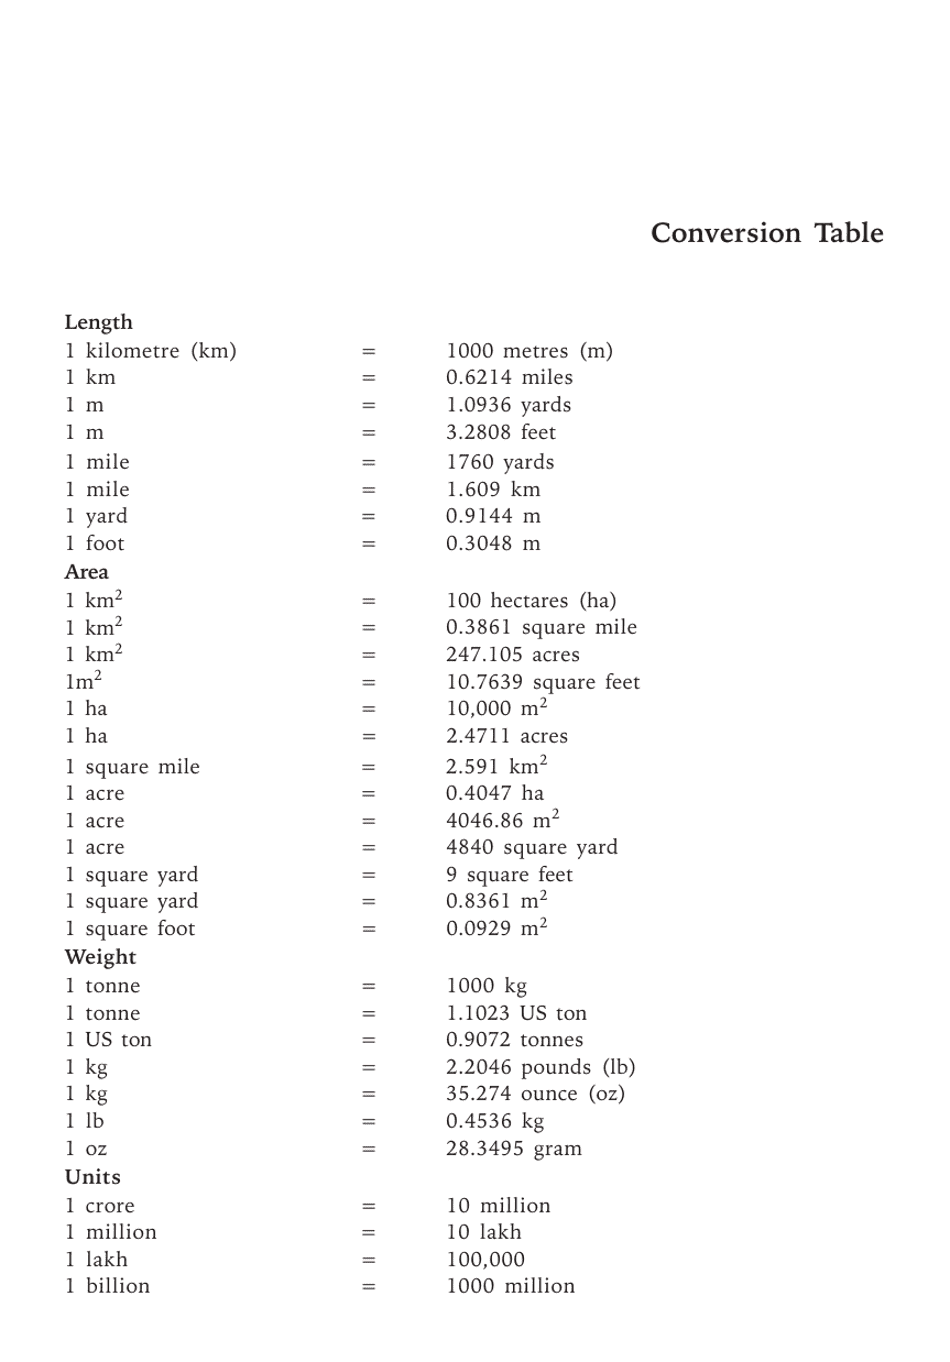 Agricultural Measurements Conversion Table - Find all the necessary conversions for agricultural measurements including weight, volume, area, and length.